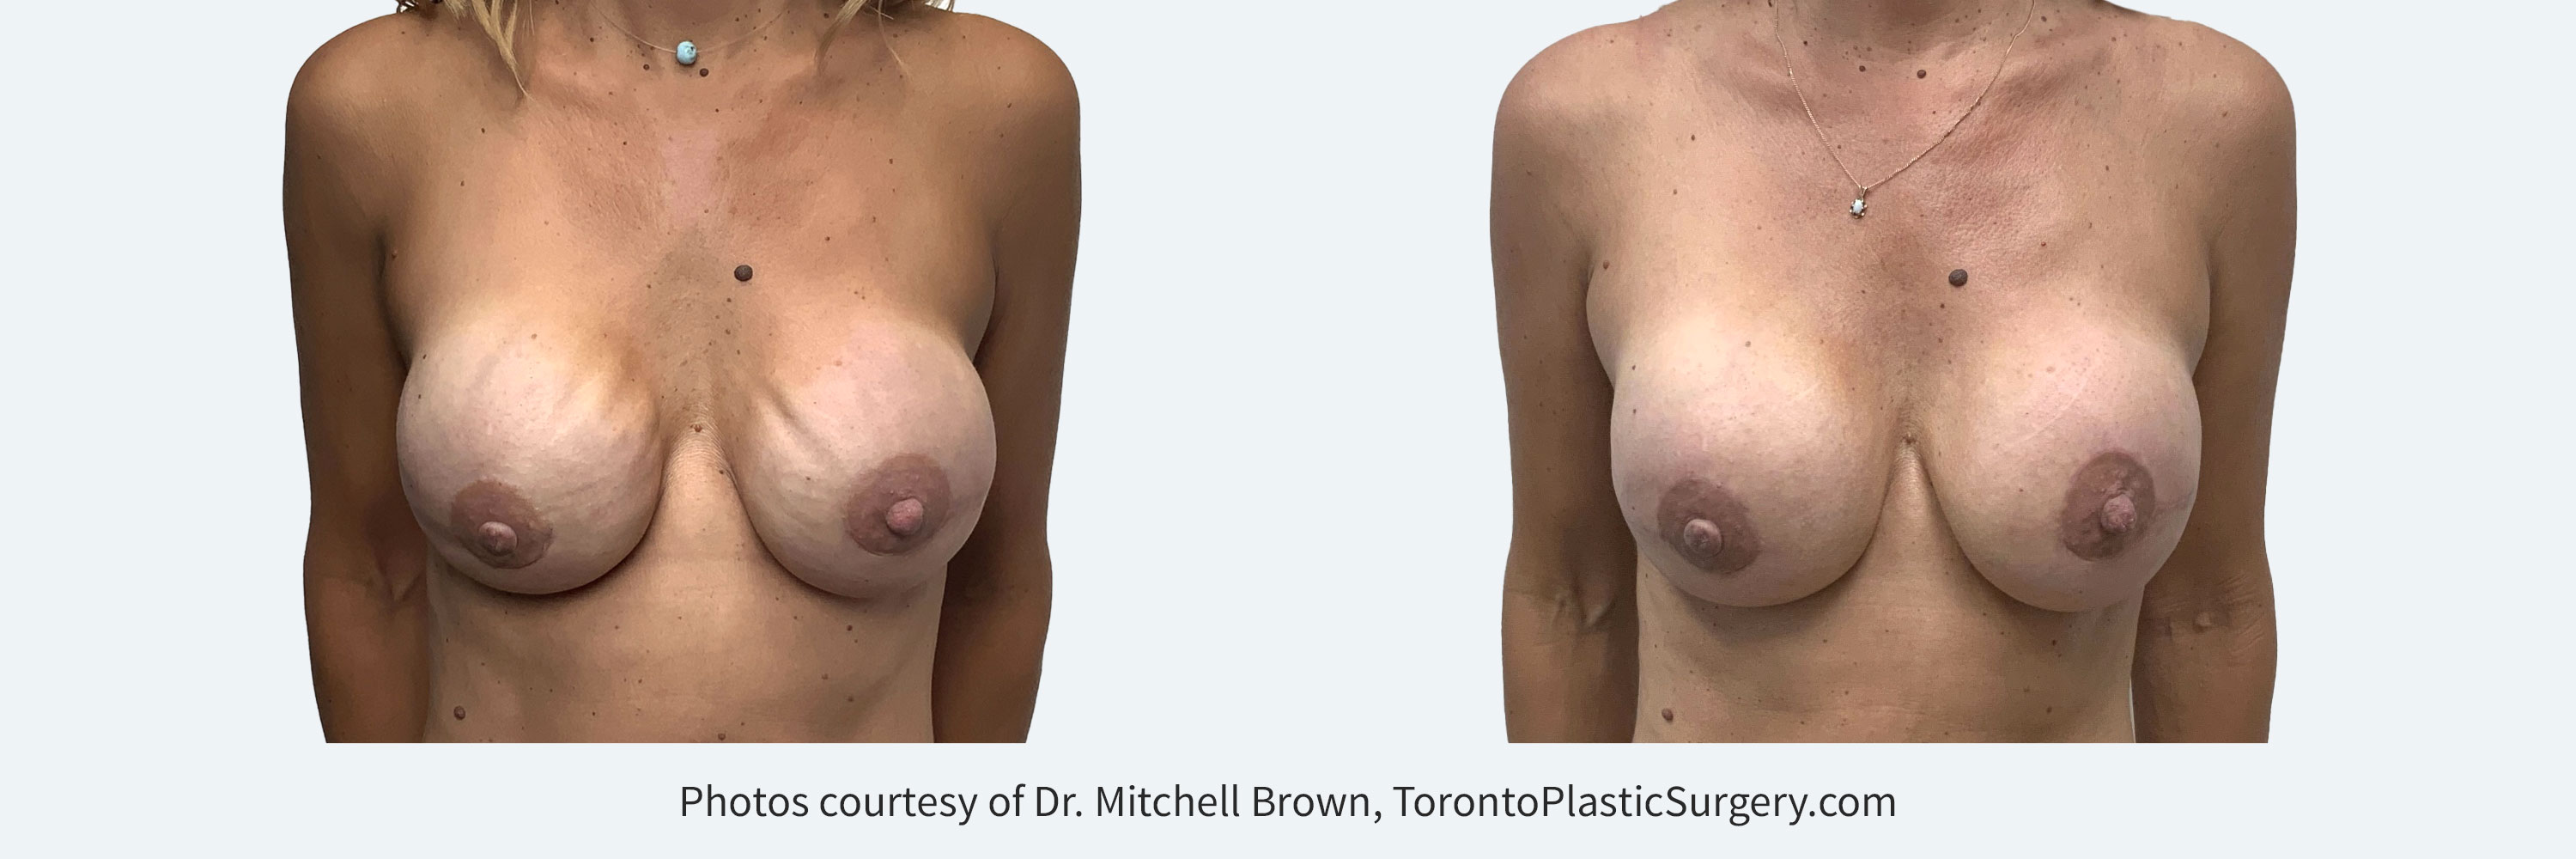 Nipple sparing mastectomy reconstructed using breast implants with severe visible rippling. Corrected with a combination of more highly cohesive implants, fat grafting and insertion of an internal sling for implant support. Before and 6 months after.